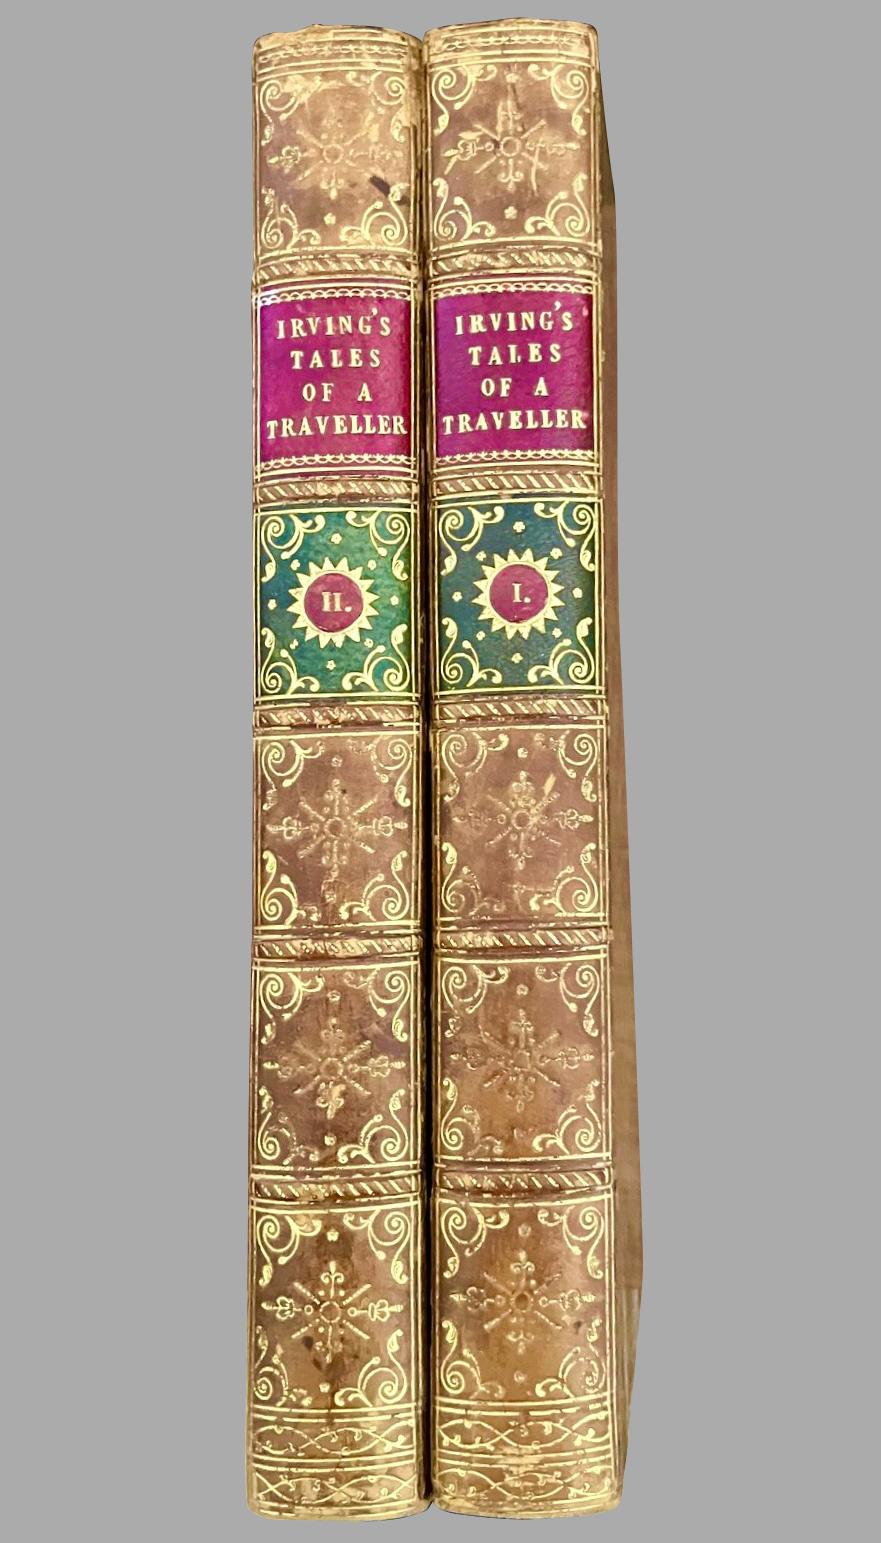 Tales of a Traveler by Geoffrey Crayon (Washington Irving) 2 Volumes 1st Edition For Sale 3